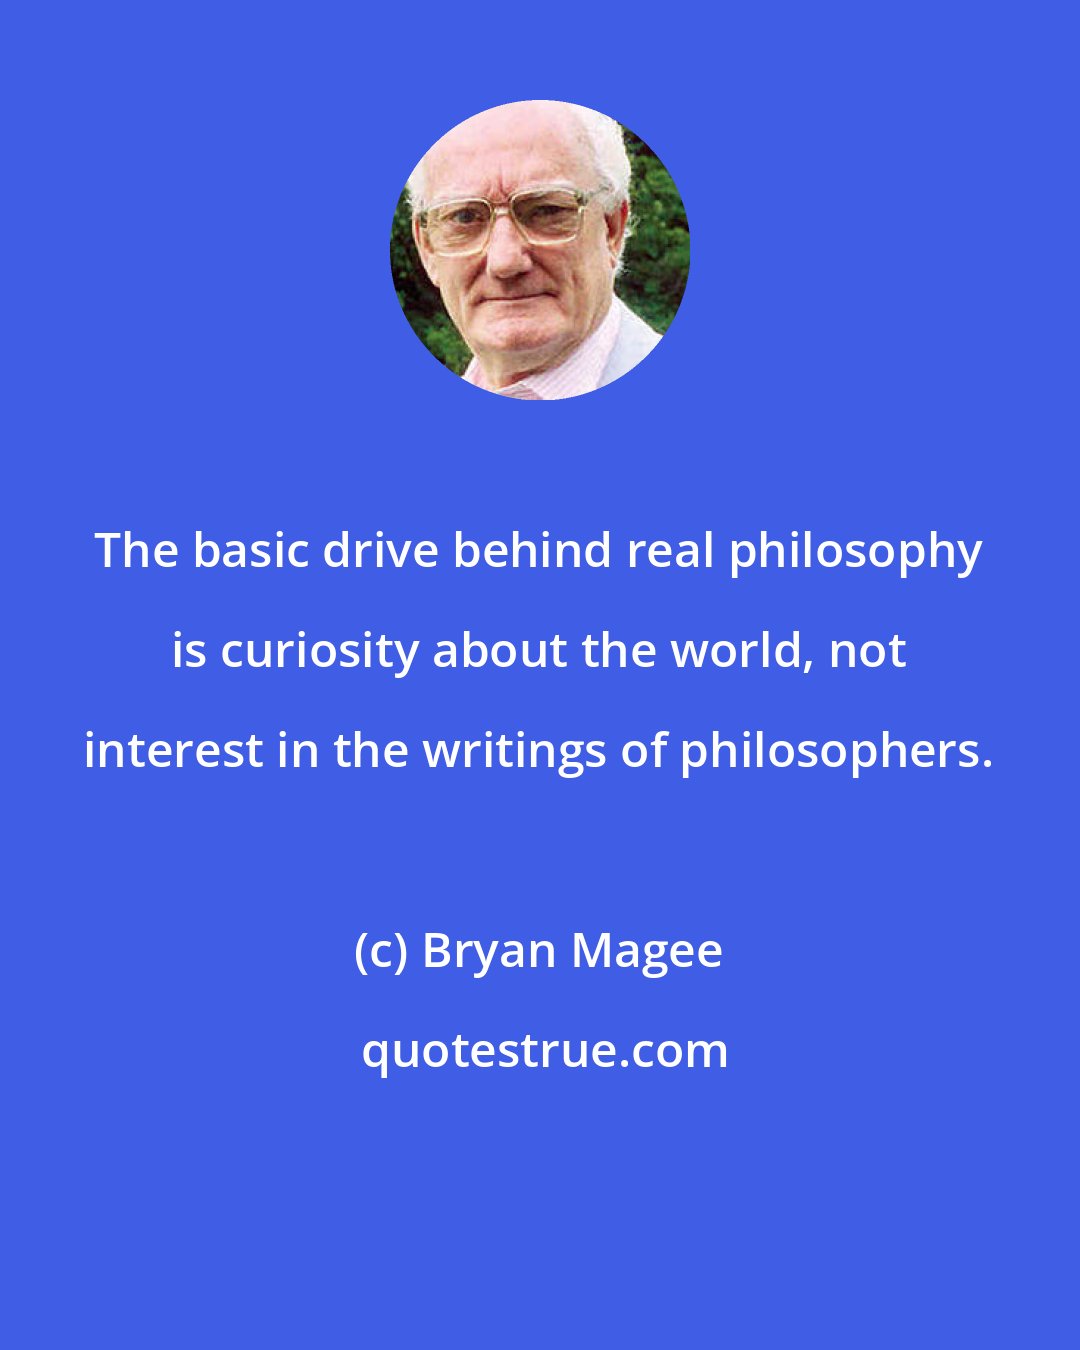 Bryan Magee: The basic drive behind real philosophy is curiosity about the world, not interest in the writings of philosophers.